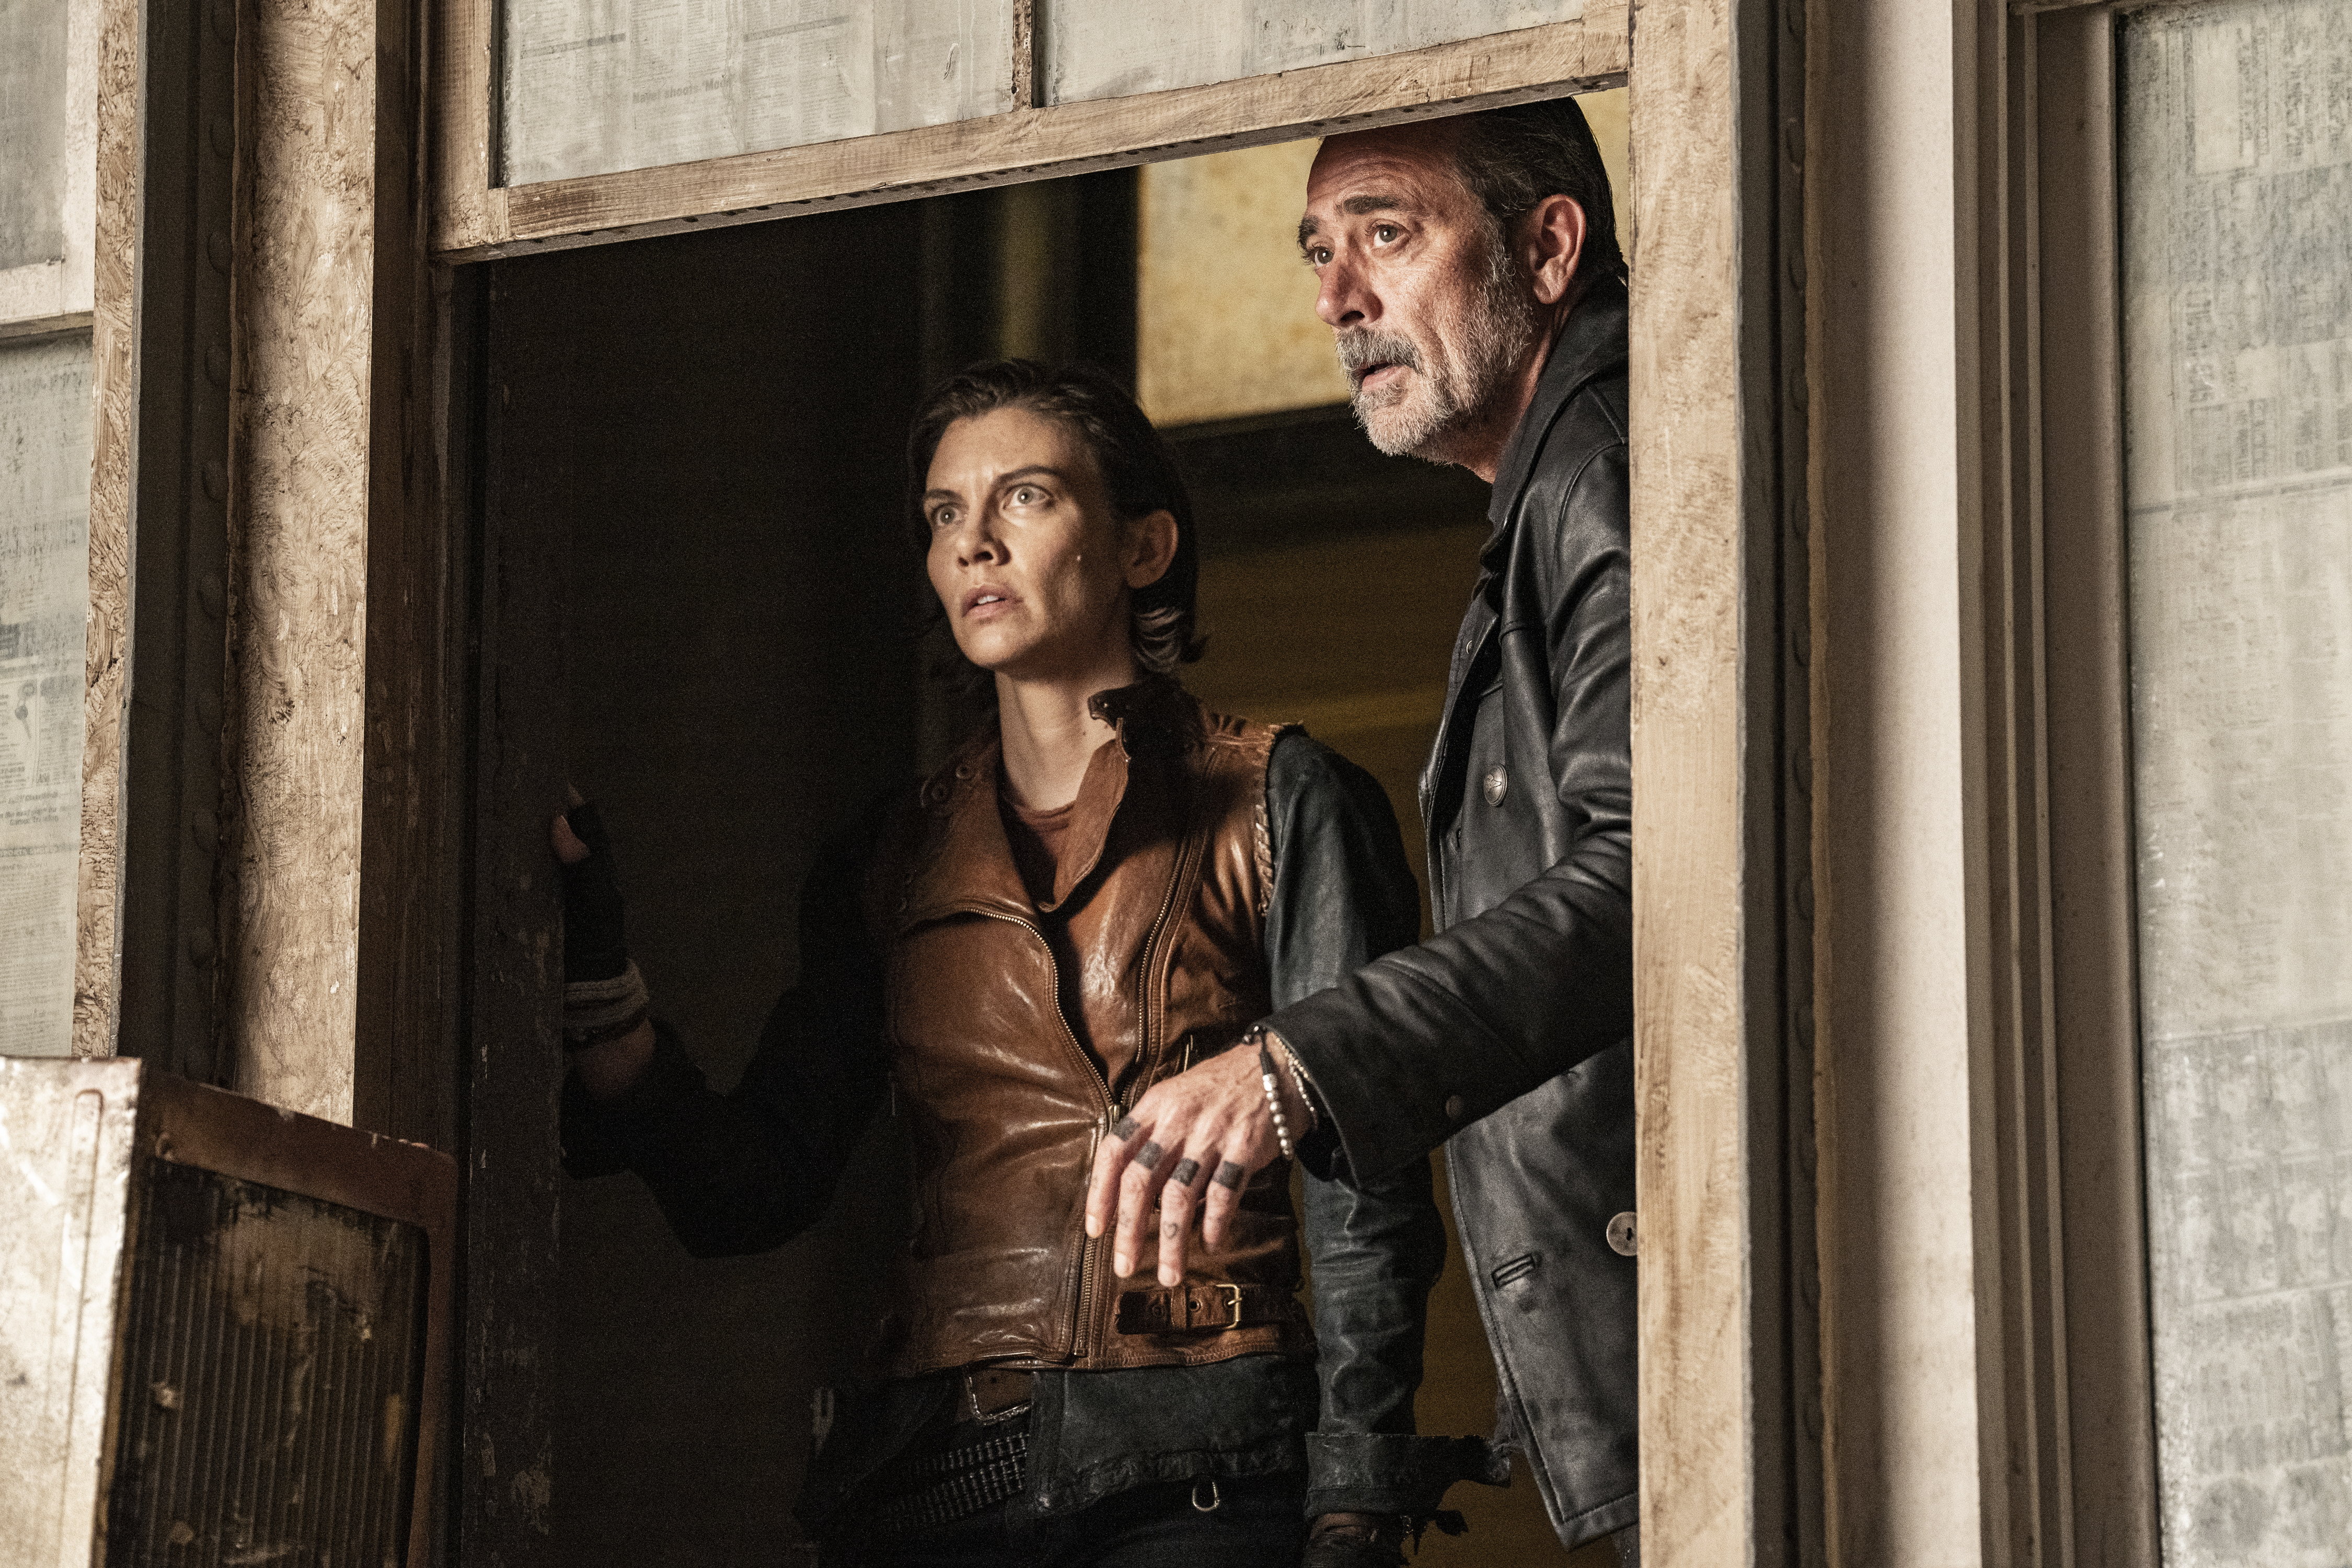 Maggie (Lauren Cohan) and Negan (Jeffrey Dean Morgan) looking out a window concerned in a still from The Walking Dead: Dead City